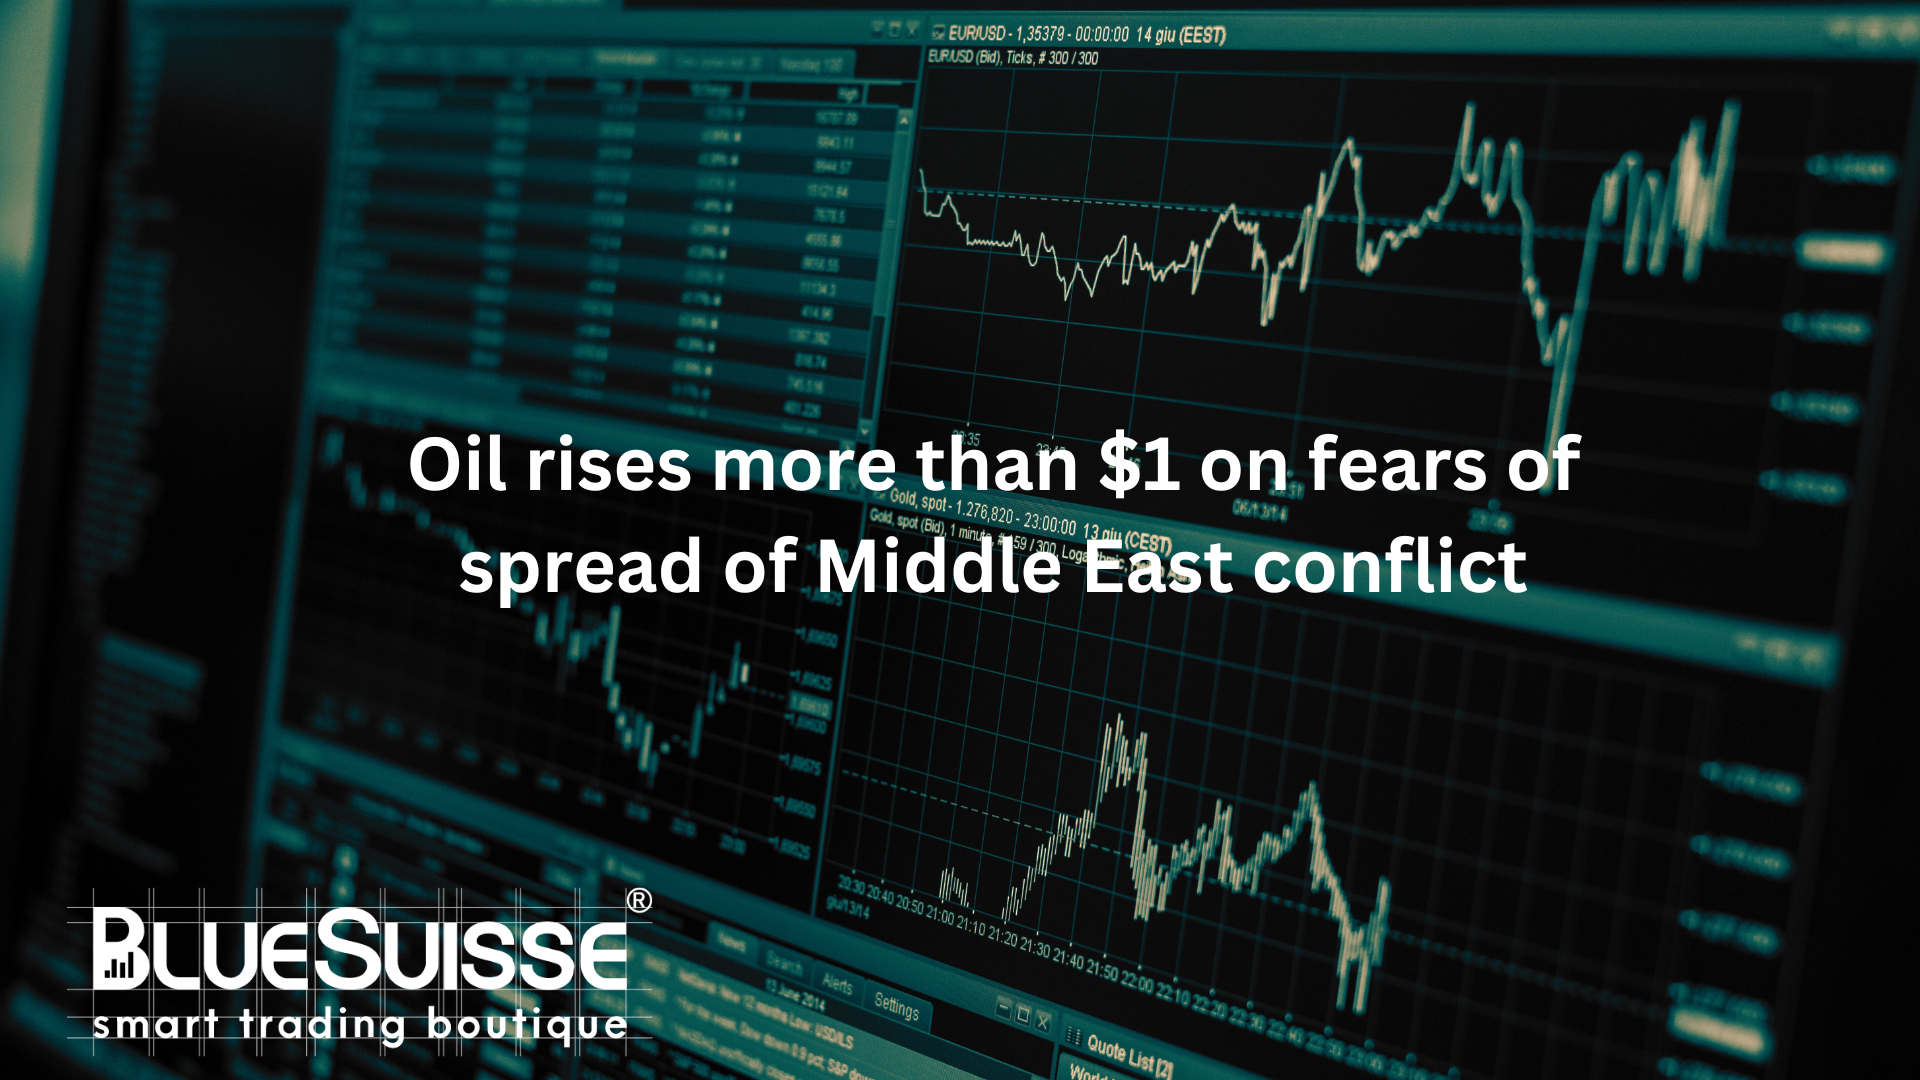 Oil rises more than $1 on fears of spread of Middle East conflict